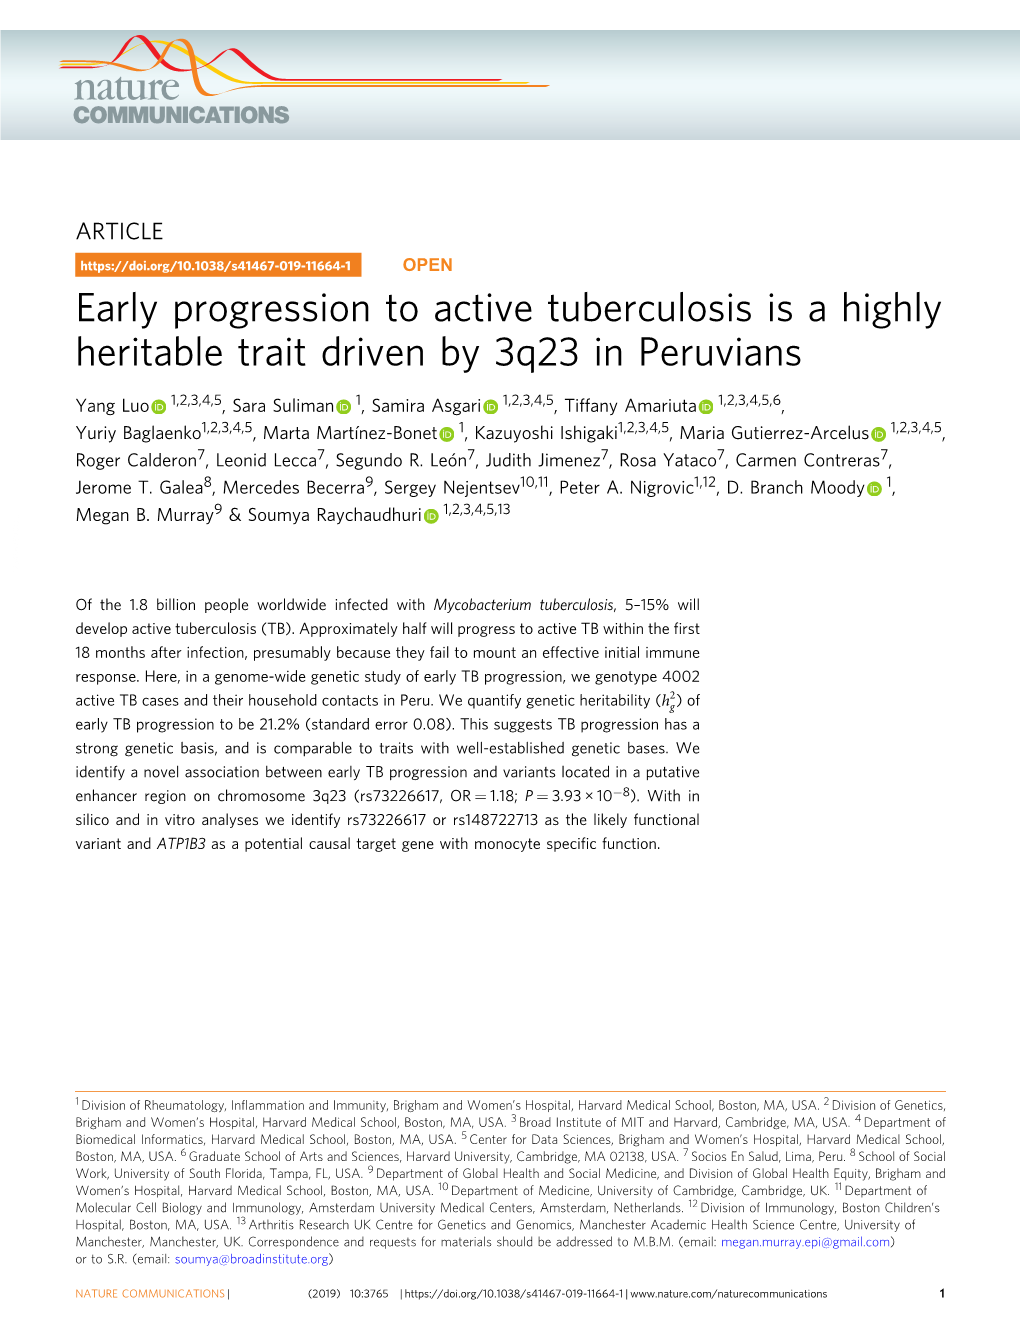 Early Progression to Active Tuberculosis Is a Highly Heritable Trait Driven by 3Q23 in Peruvians